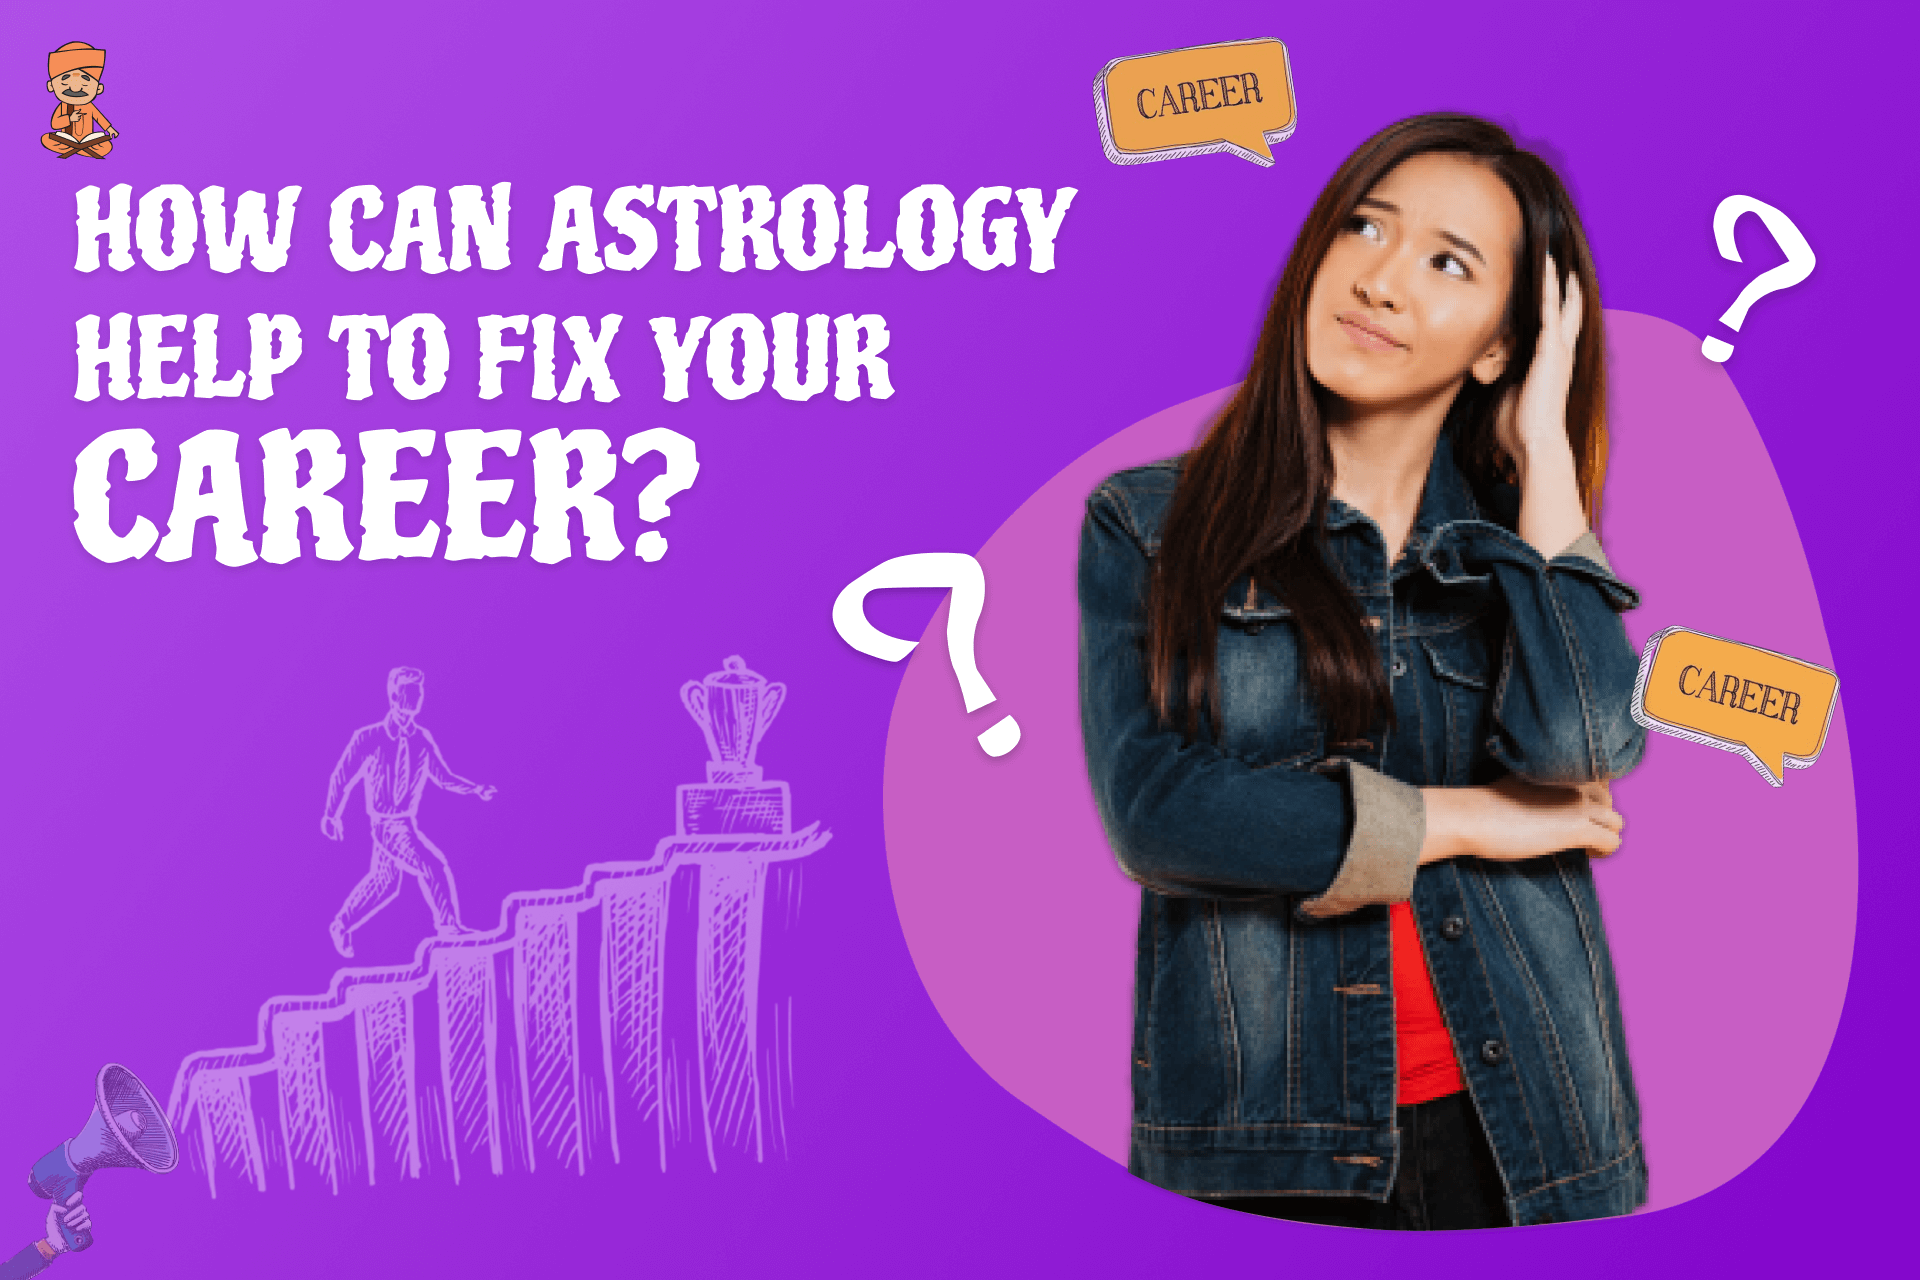 HOW CAN ASTROLOGY HELP TO FIX YOUR CAREER?